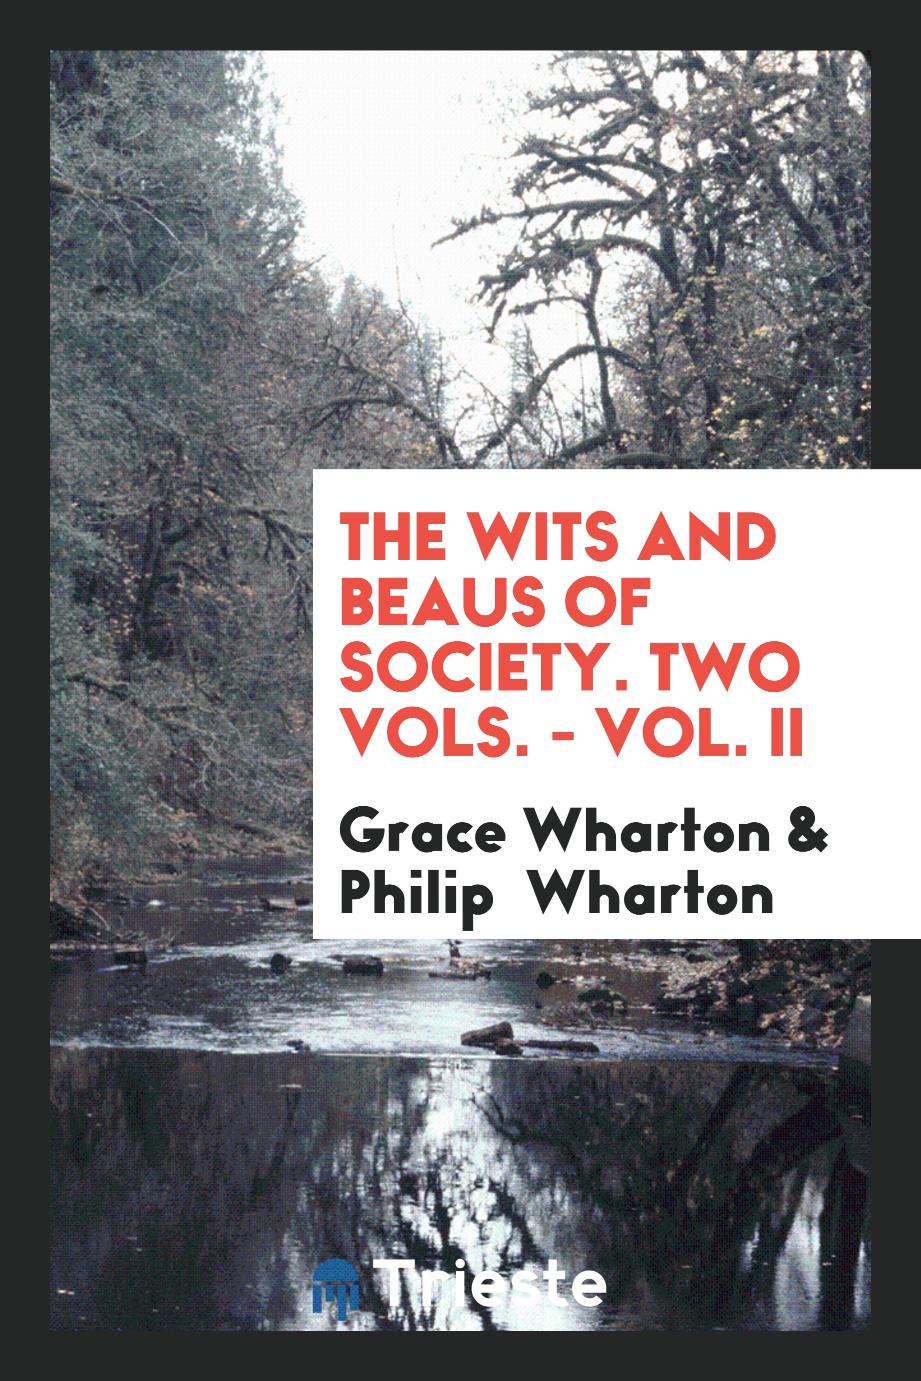 The Wits and Beaus of Society. Two Vols. - Vol. II